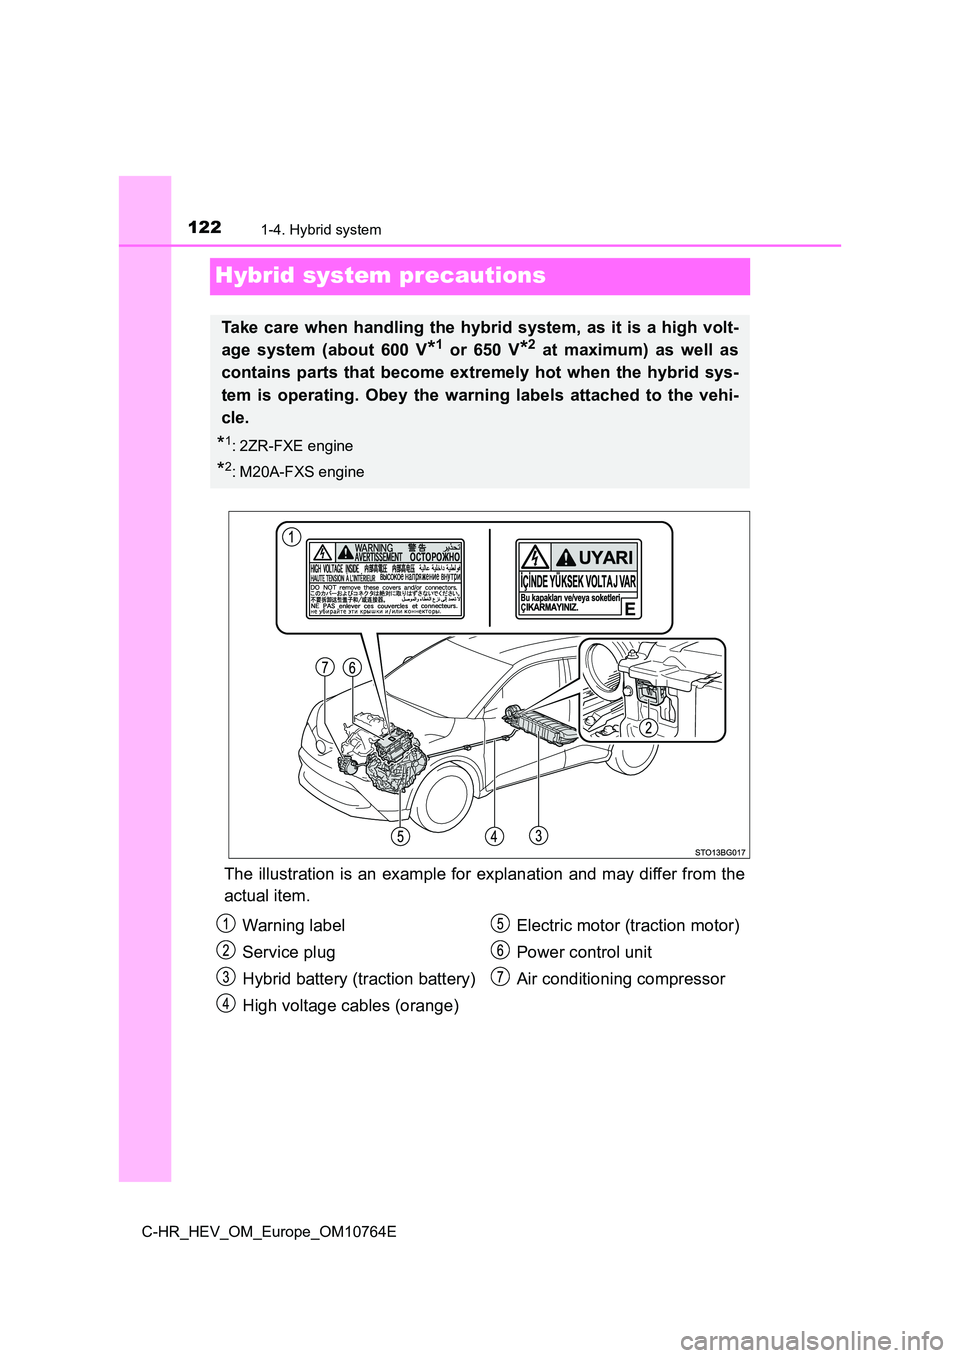 TOYOTA C-HR 2023  Owners Manual 1221-4. Hybrid system
C-HR_HEV_OM_Europe_OM10764E
Hybrid system precautions
The illustration is an example for explanation and may differ from the 
actual item.
Take care when handling the hybrid syst